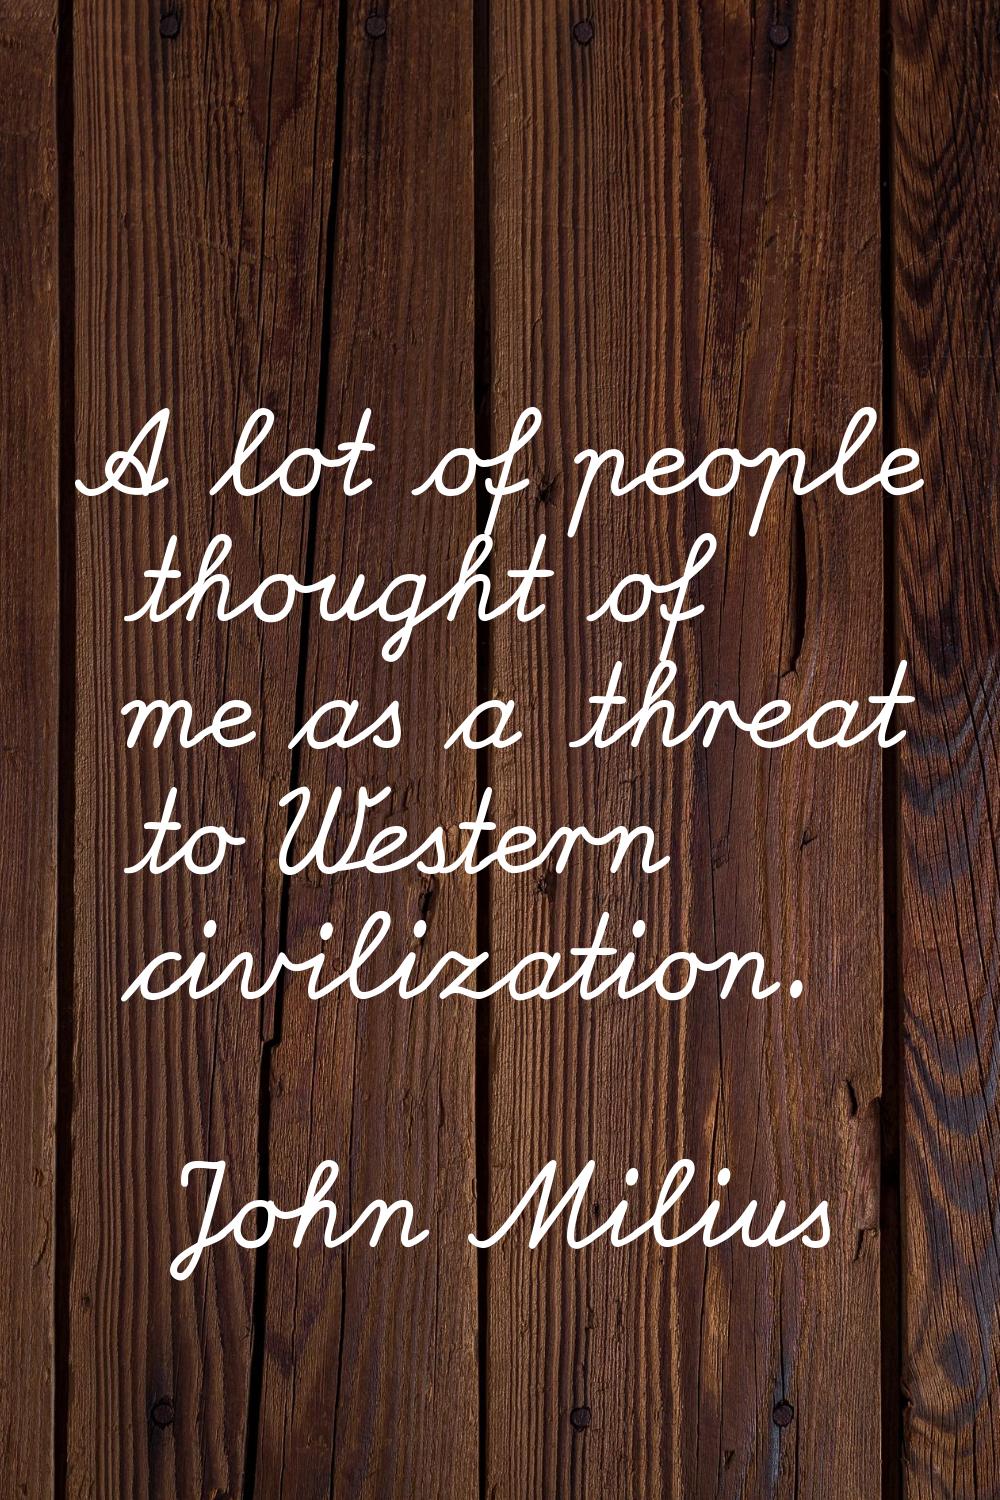 A lot of people thought of me as a threat to Western civilization.